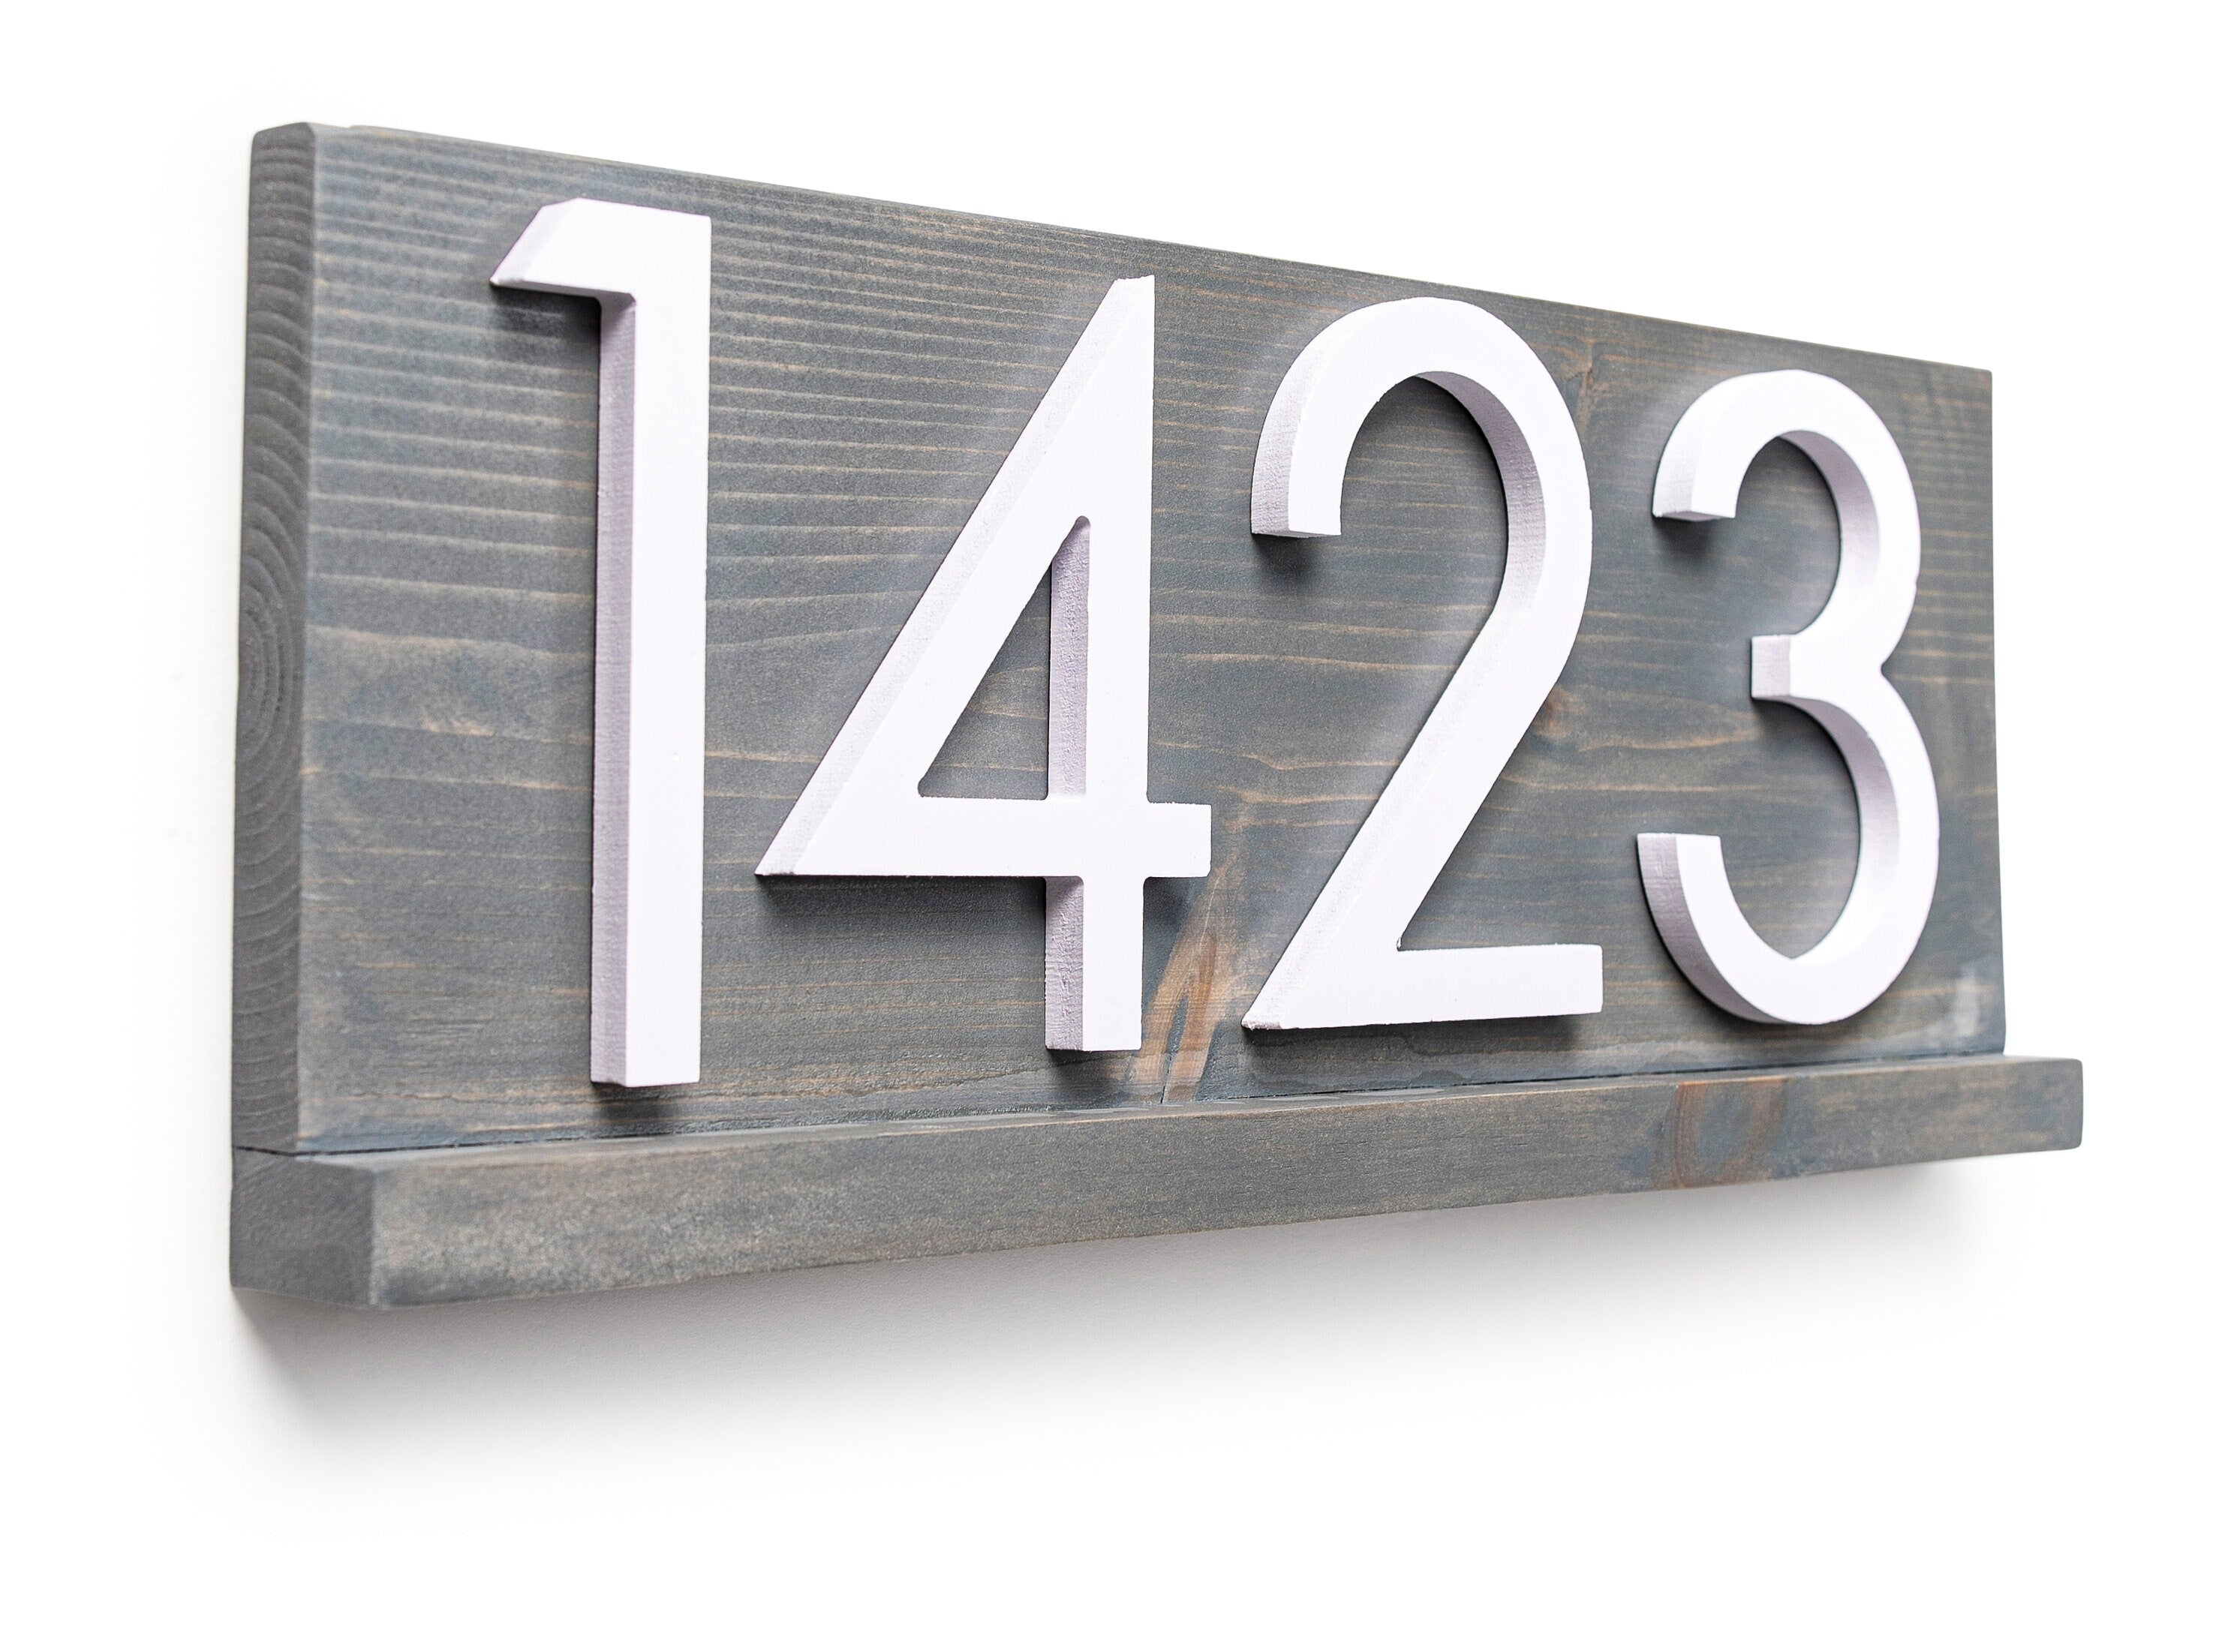 Delmar Custom House Sign - Modern Home Decor with Personalized Name and Numbers